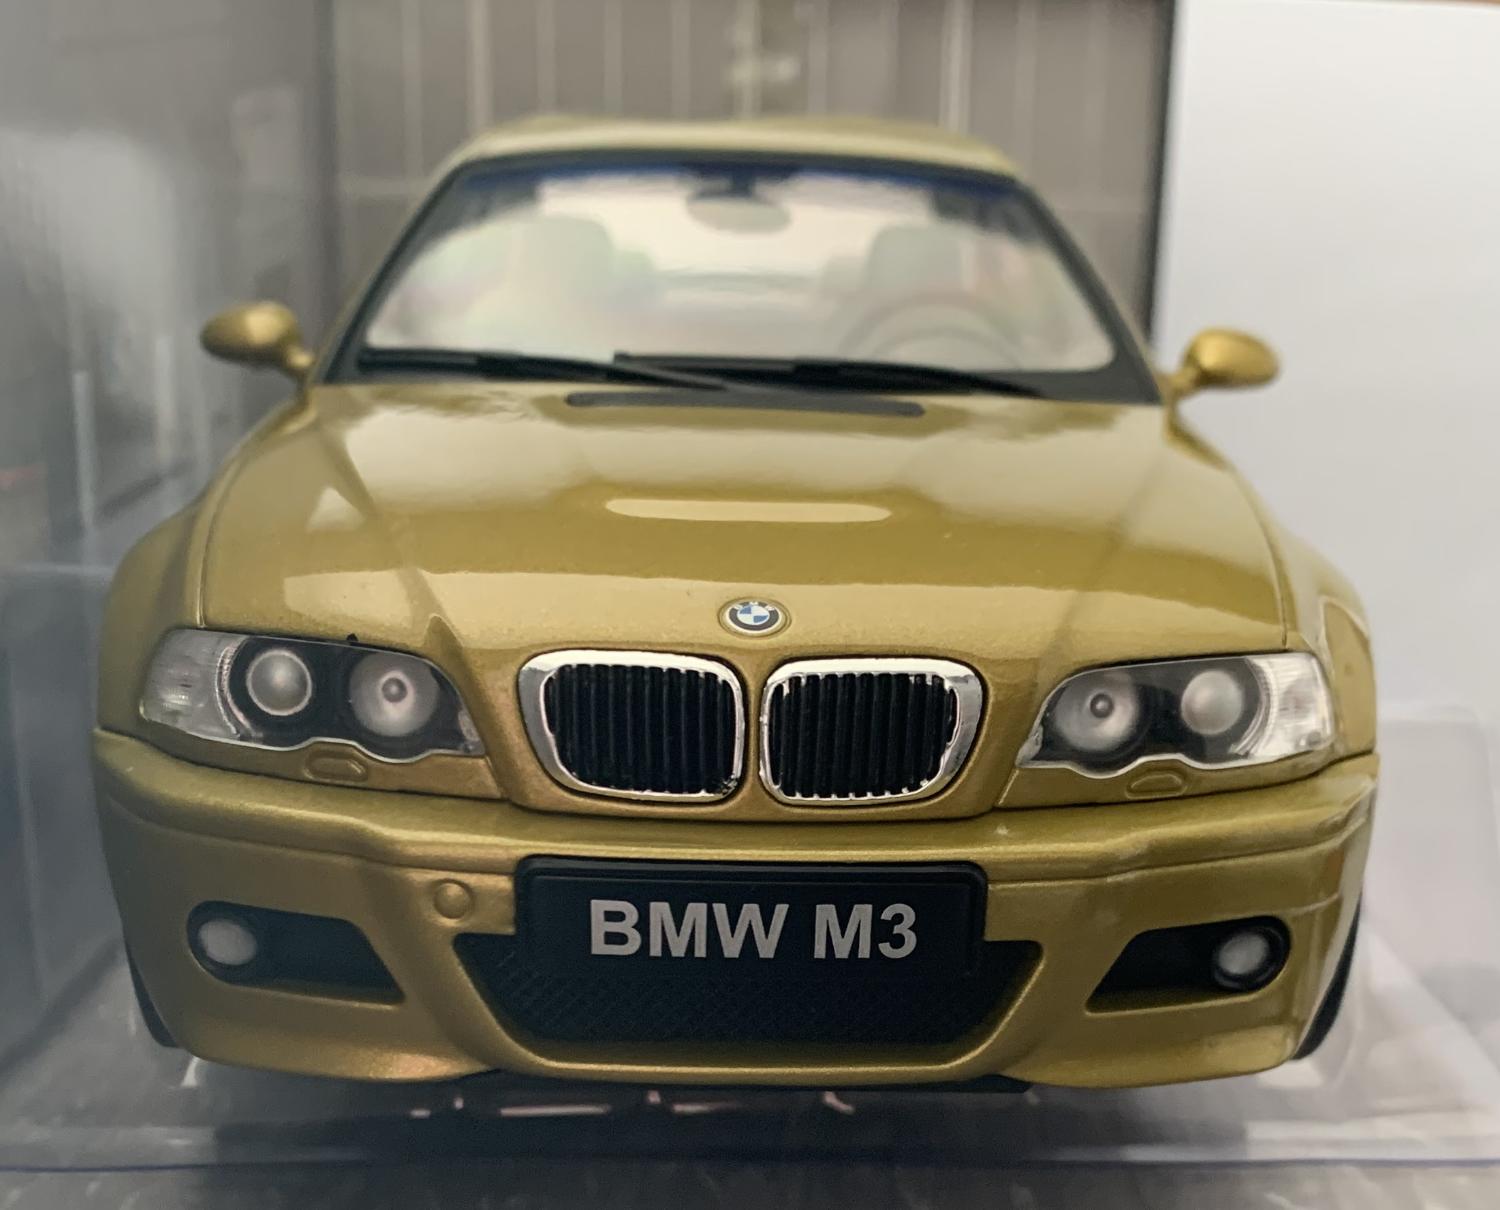 A very good representation of the BMW E46 Coupe M3 decorated in phoenix yellow with alloy wheels.